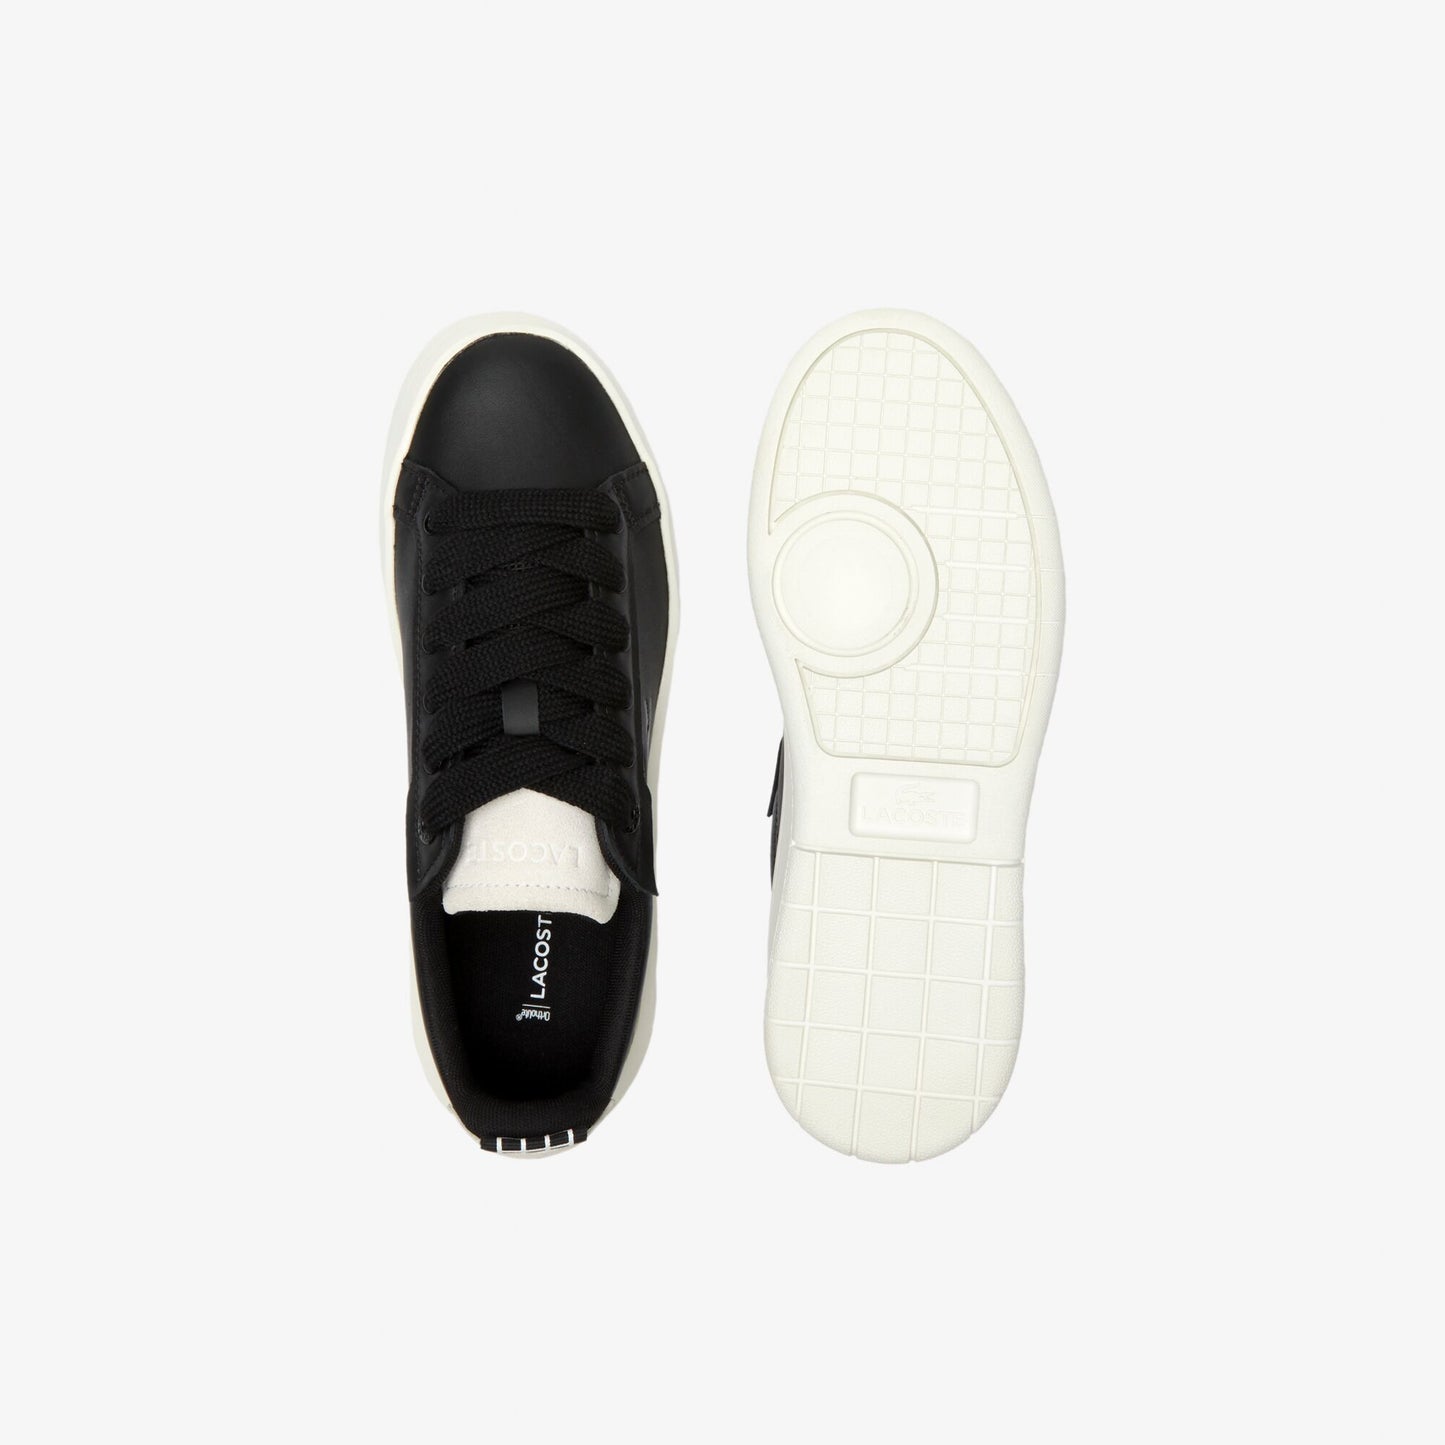 Women's Lacoste Carnaby Platform Leather Trainers - 45SFA0040